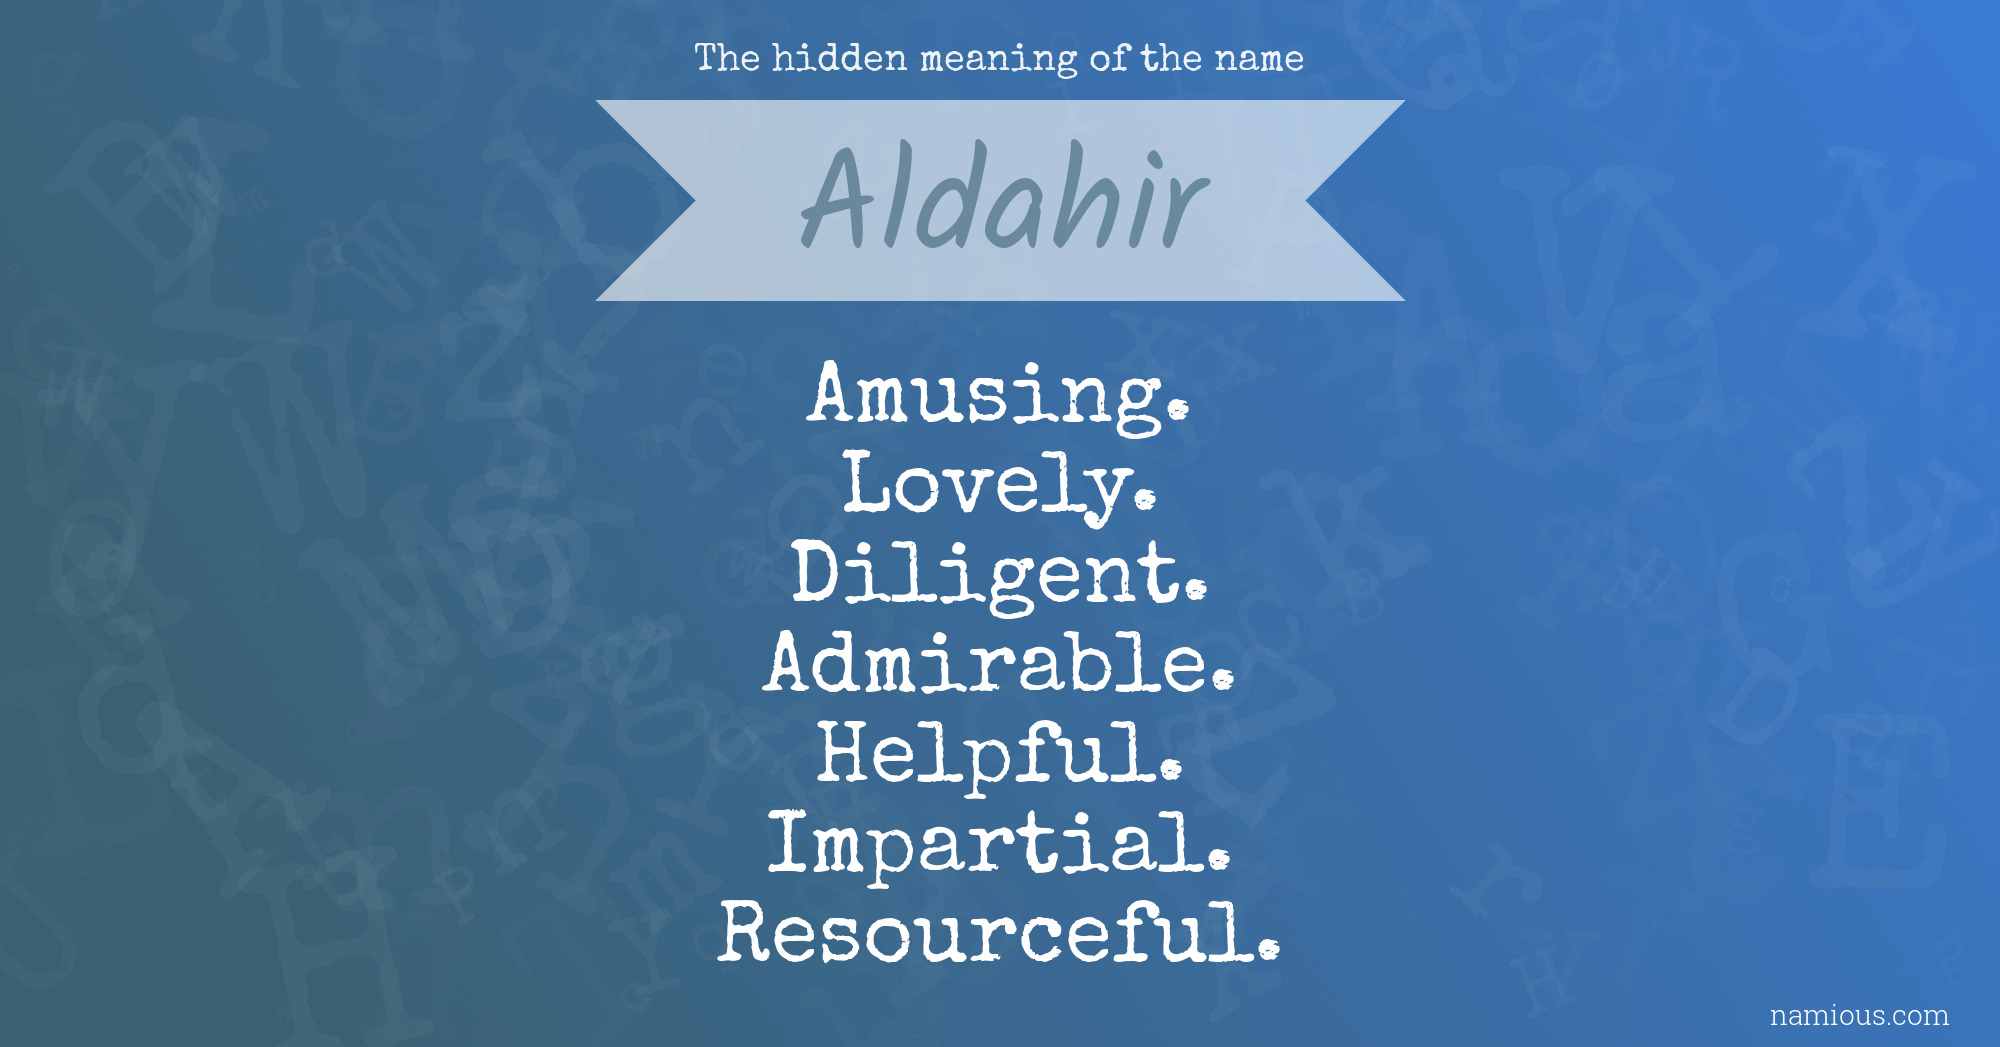 The hidden meaning of the name Aldahir